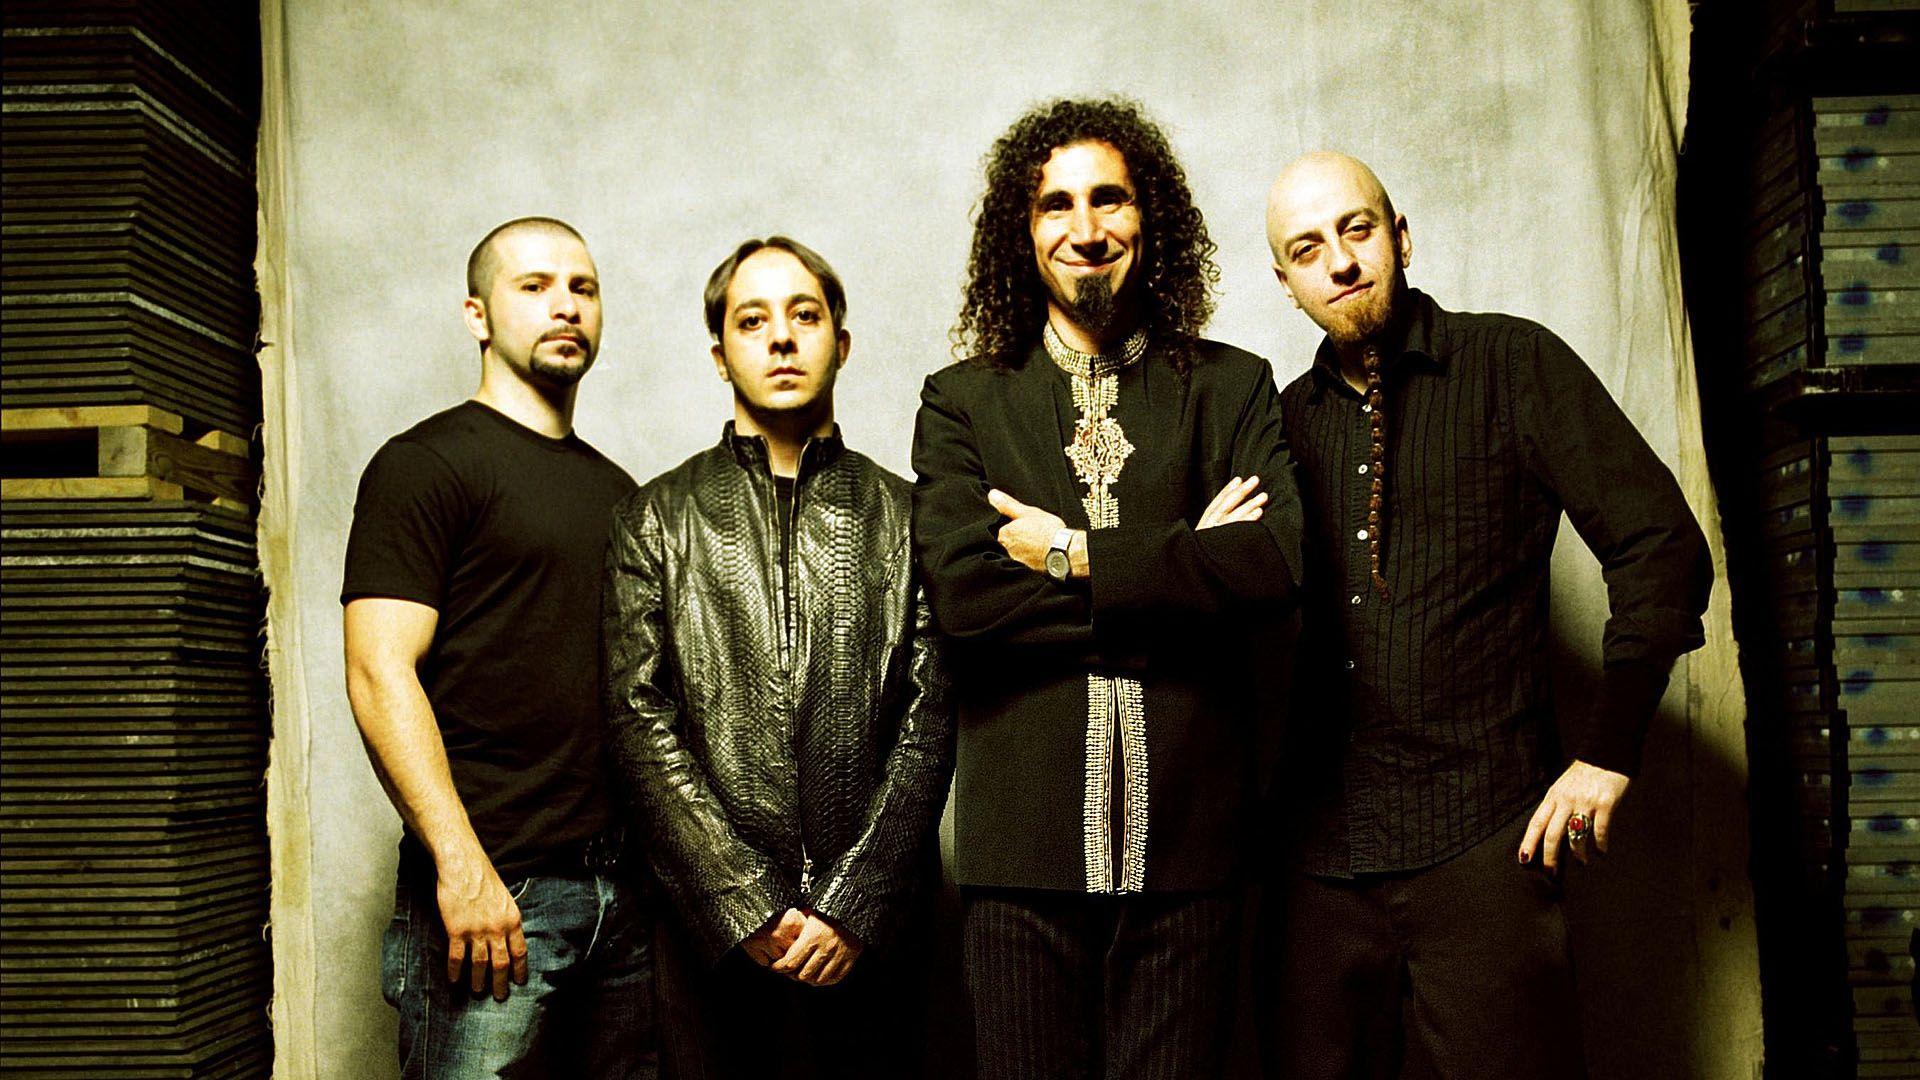 Download Wallpaper 1920x1080 system of a down, band, members, suits